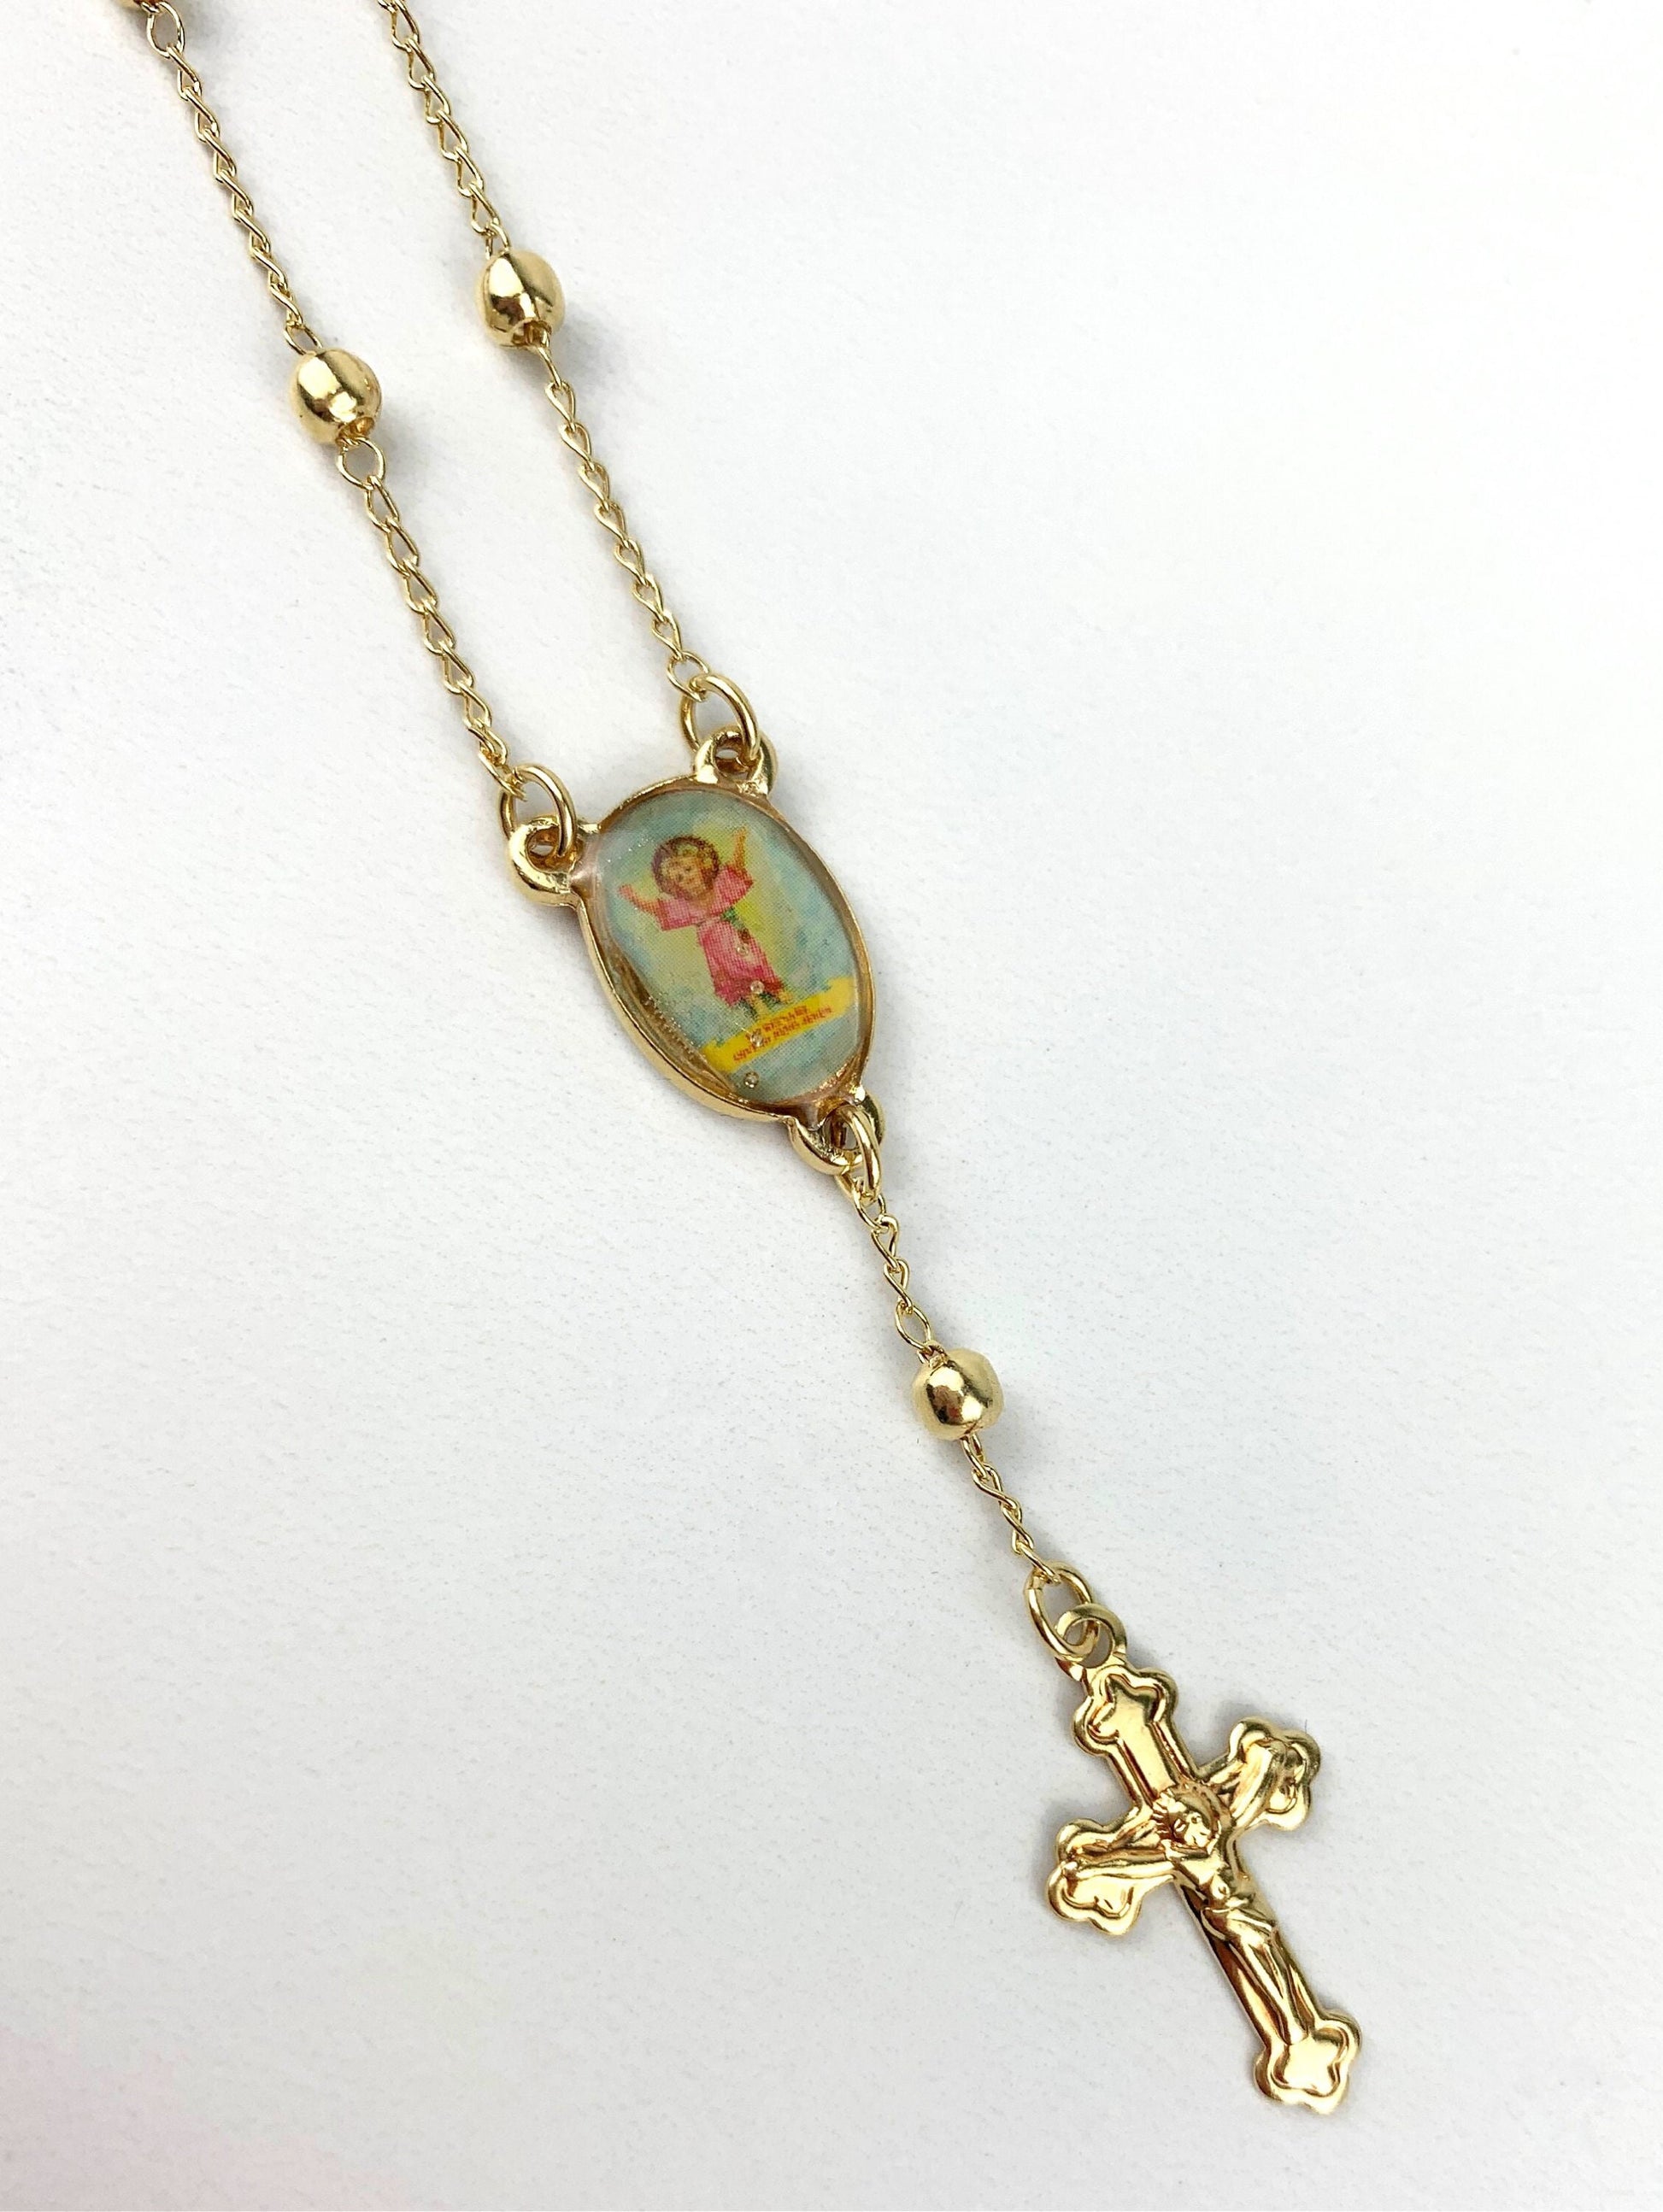 18k Gold Filled Chain & Gold Beads Divine Child, Divino Nino or Our Lady of Guadalupe Rosary Necklace, Wholesale Jewelry Making Supplies